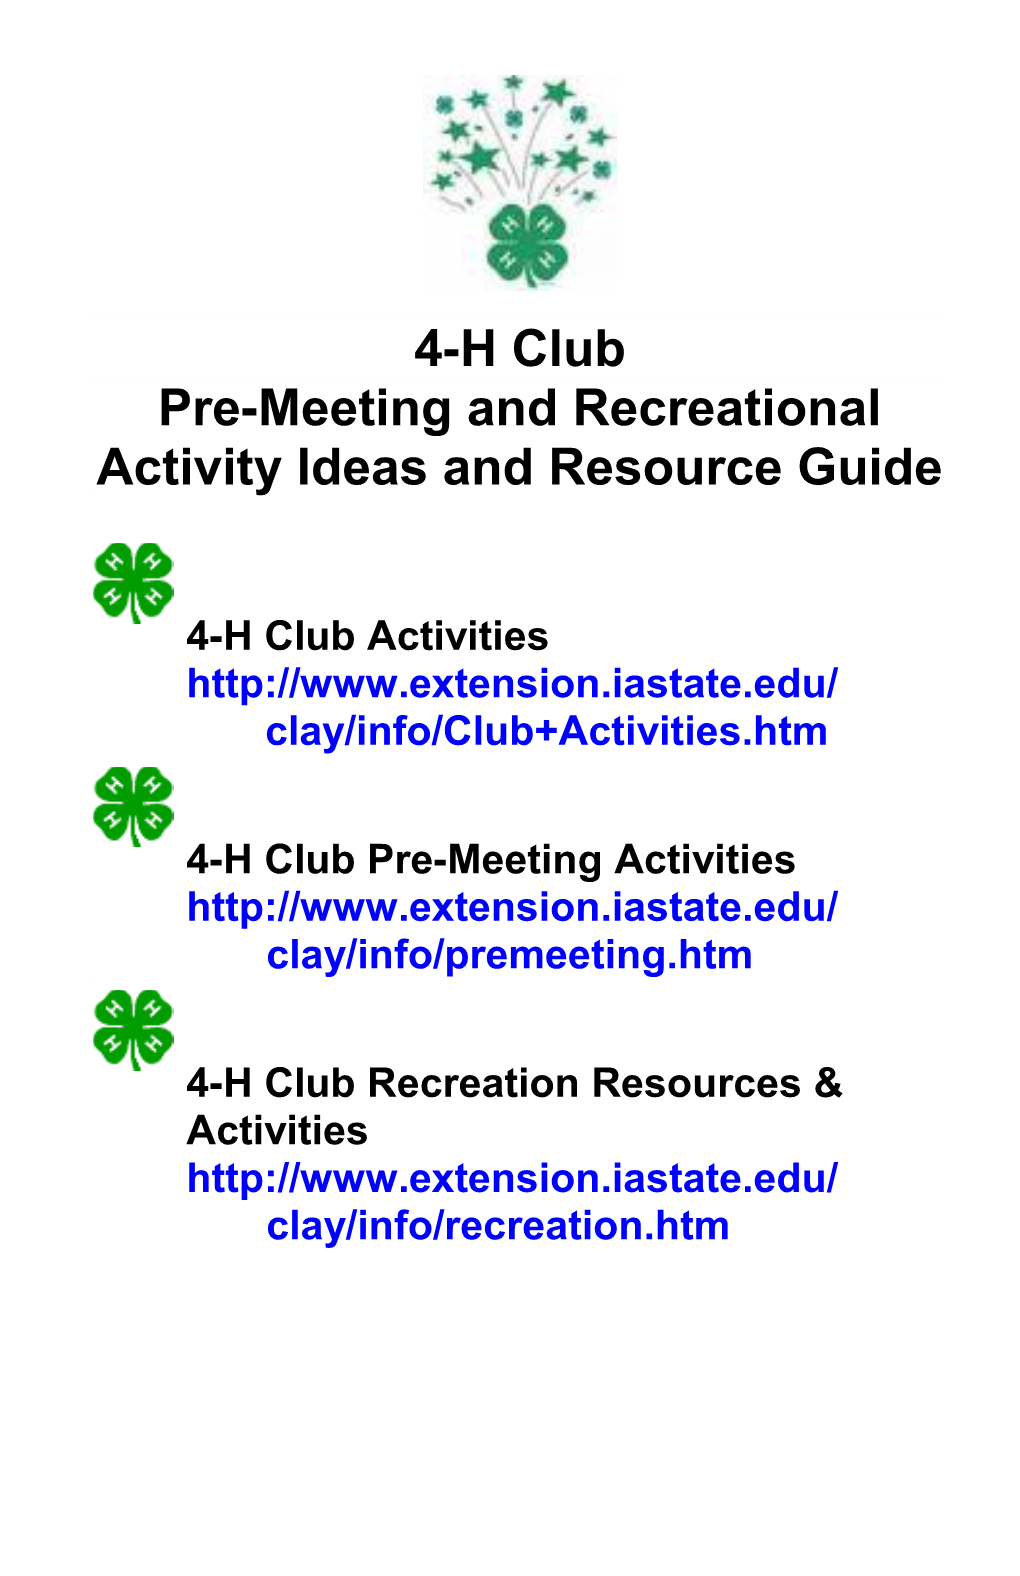 Pre-Meeting and Recreational Activity Ideas and Resource Guide